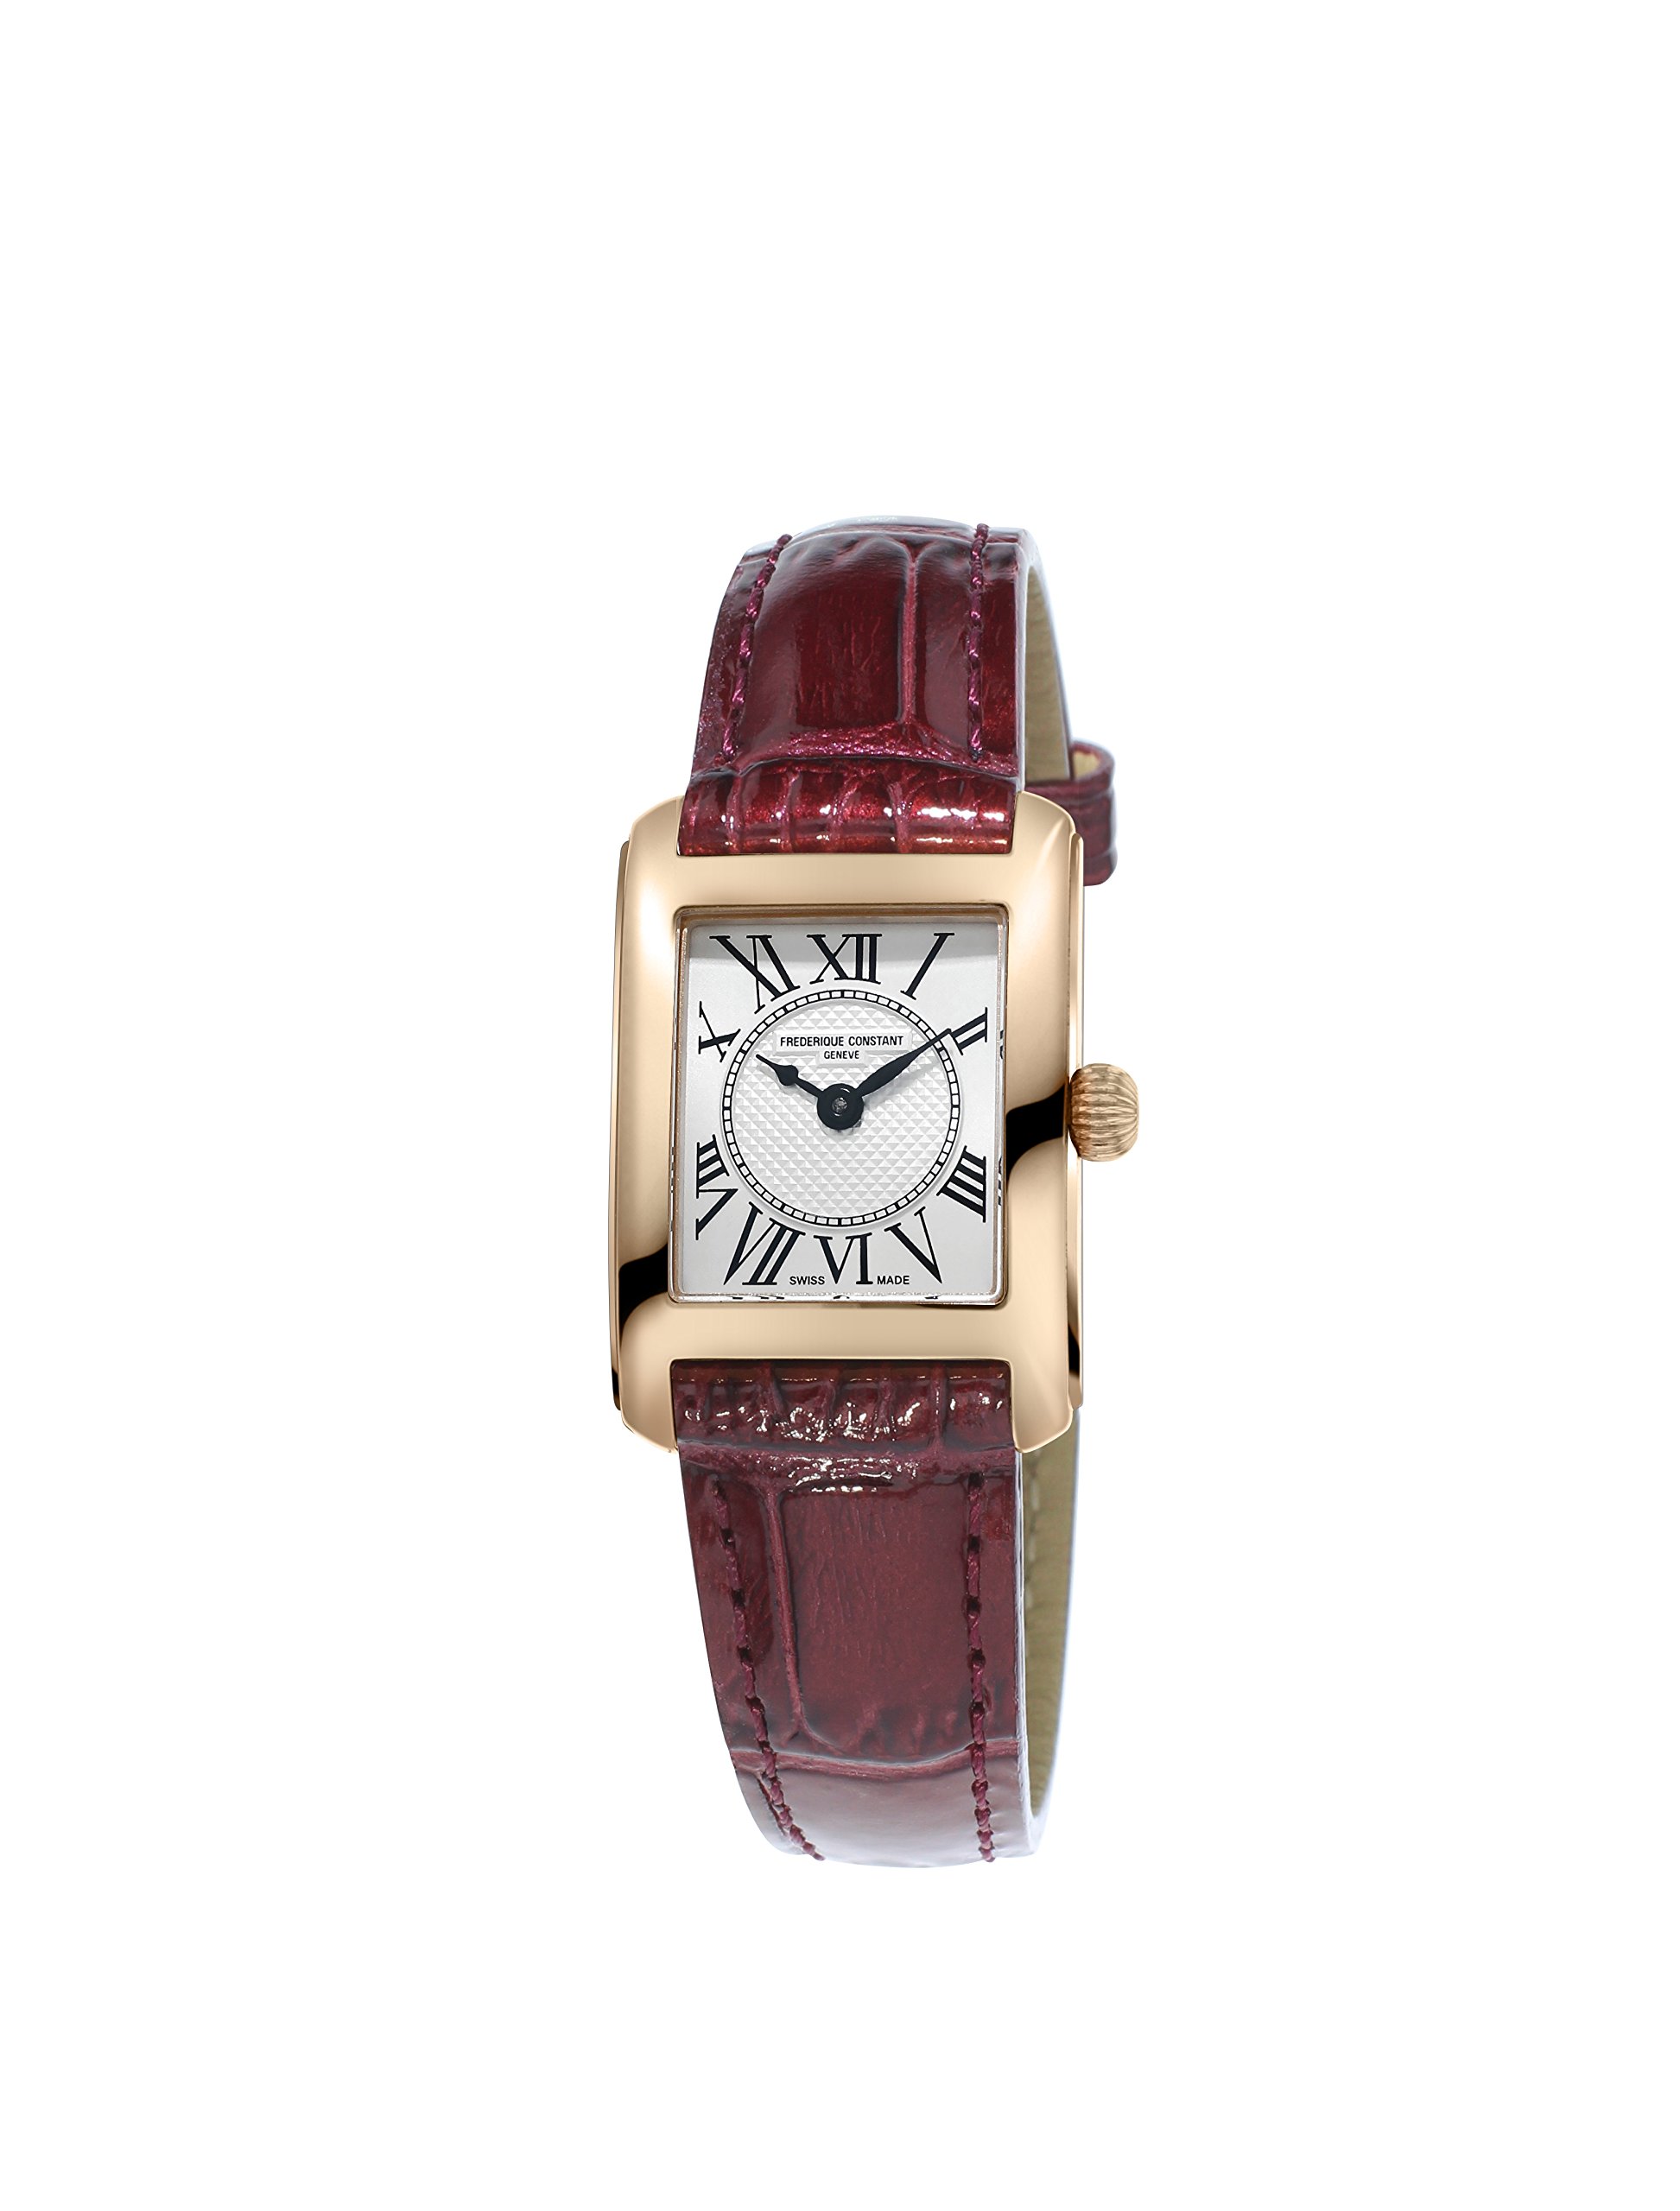 Frederique Constant Women's Carree Stainless Steel Swiss-Quartz Watch with Leather Calfskin Strap, Brown, 15 (Model: FC-200MC14)